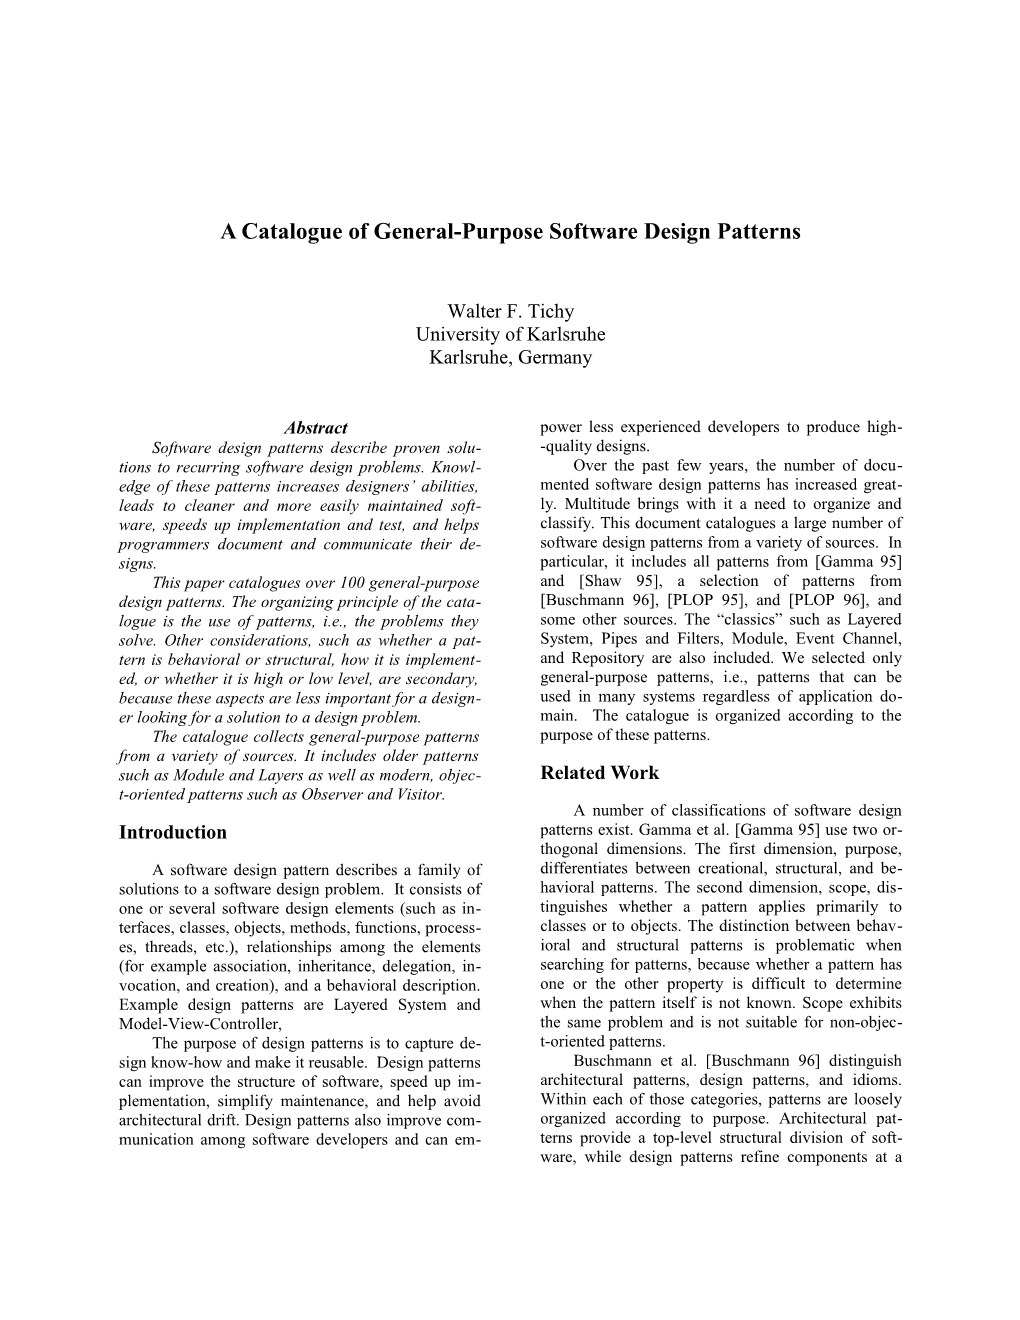 A Catalogue of General-Purpose Software Design Patterns